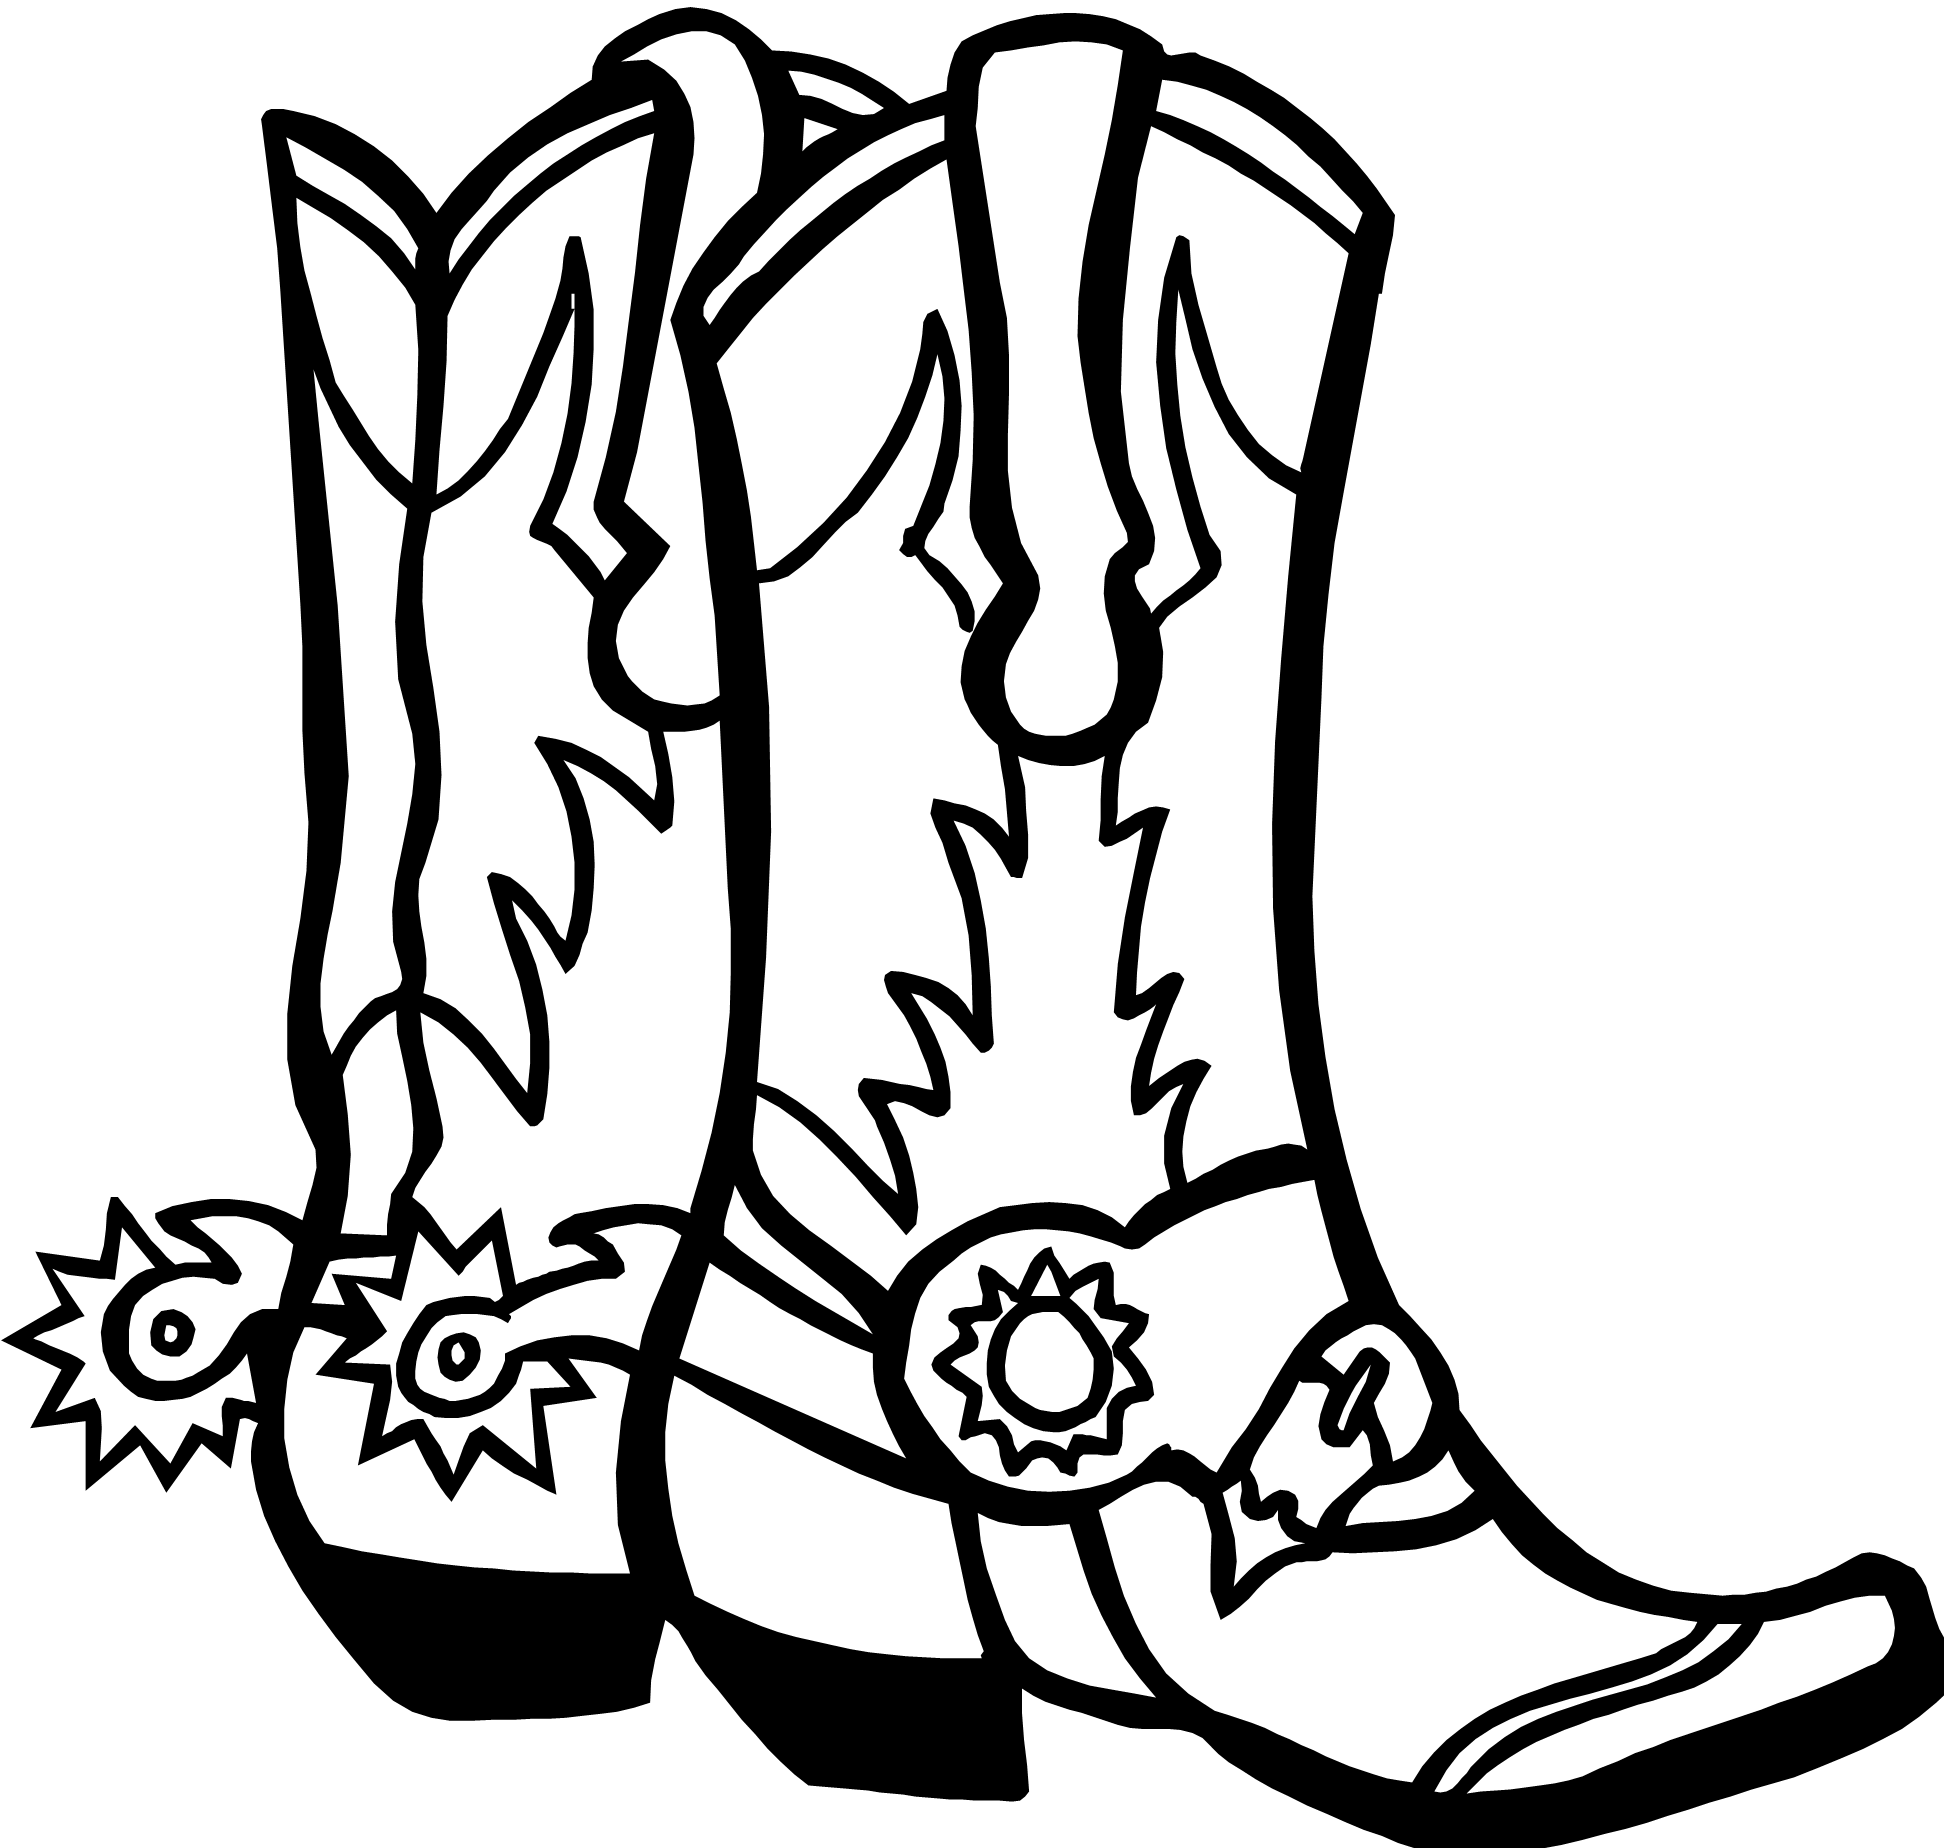 Free Drawings Of Cowboy Boots, Download Free Drawings Of Cowboy Boots